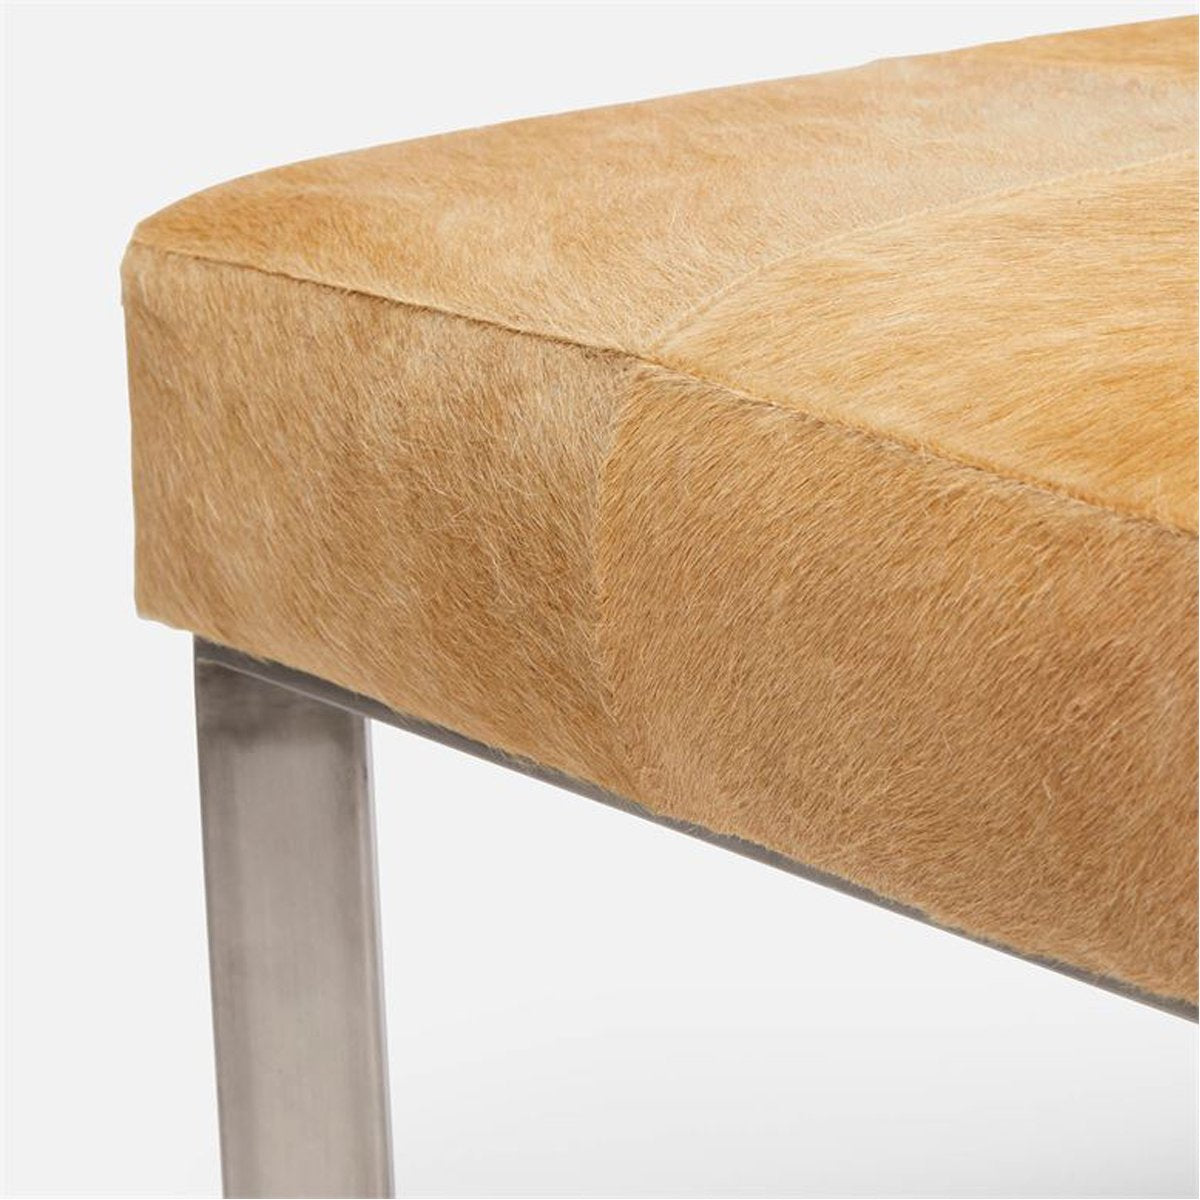 Made Goods Roger Cowhide Single Bench in Garonne Marine Leather